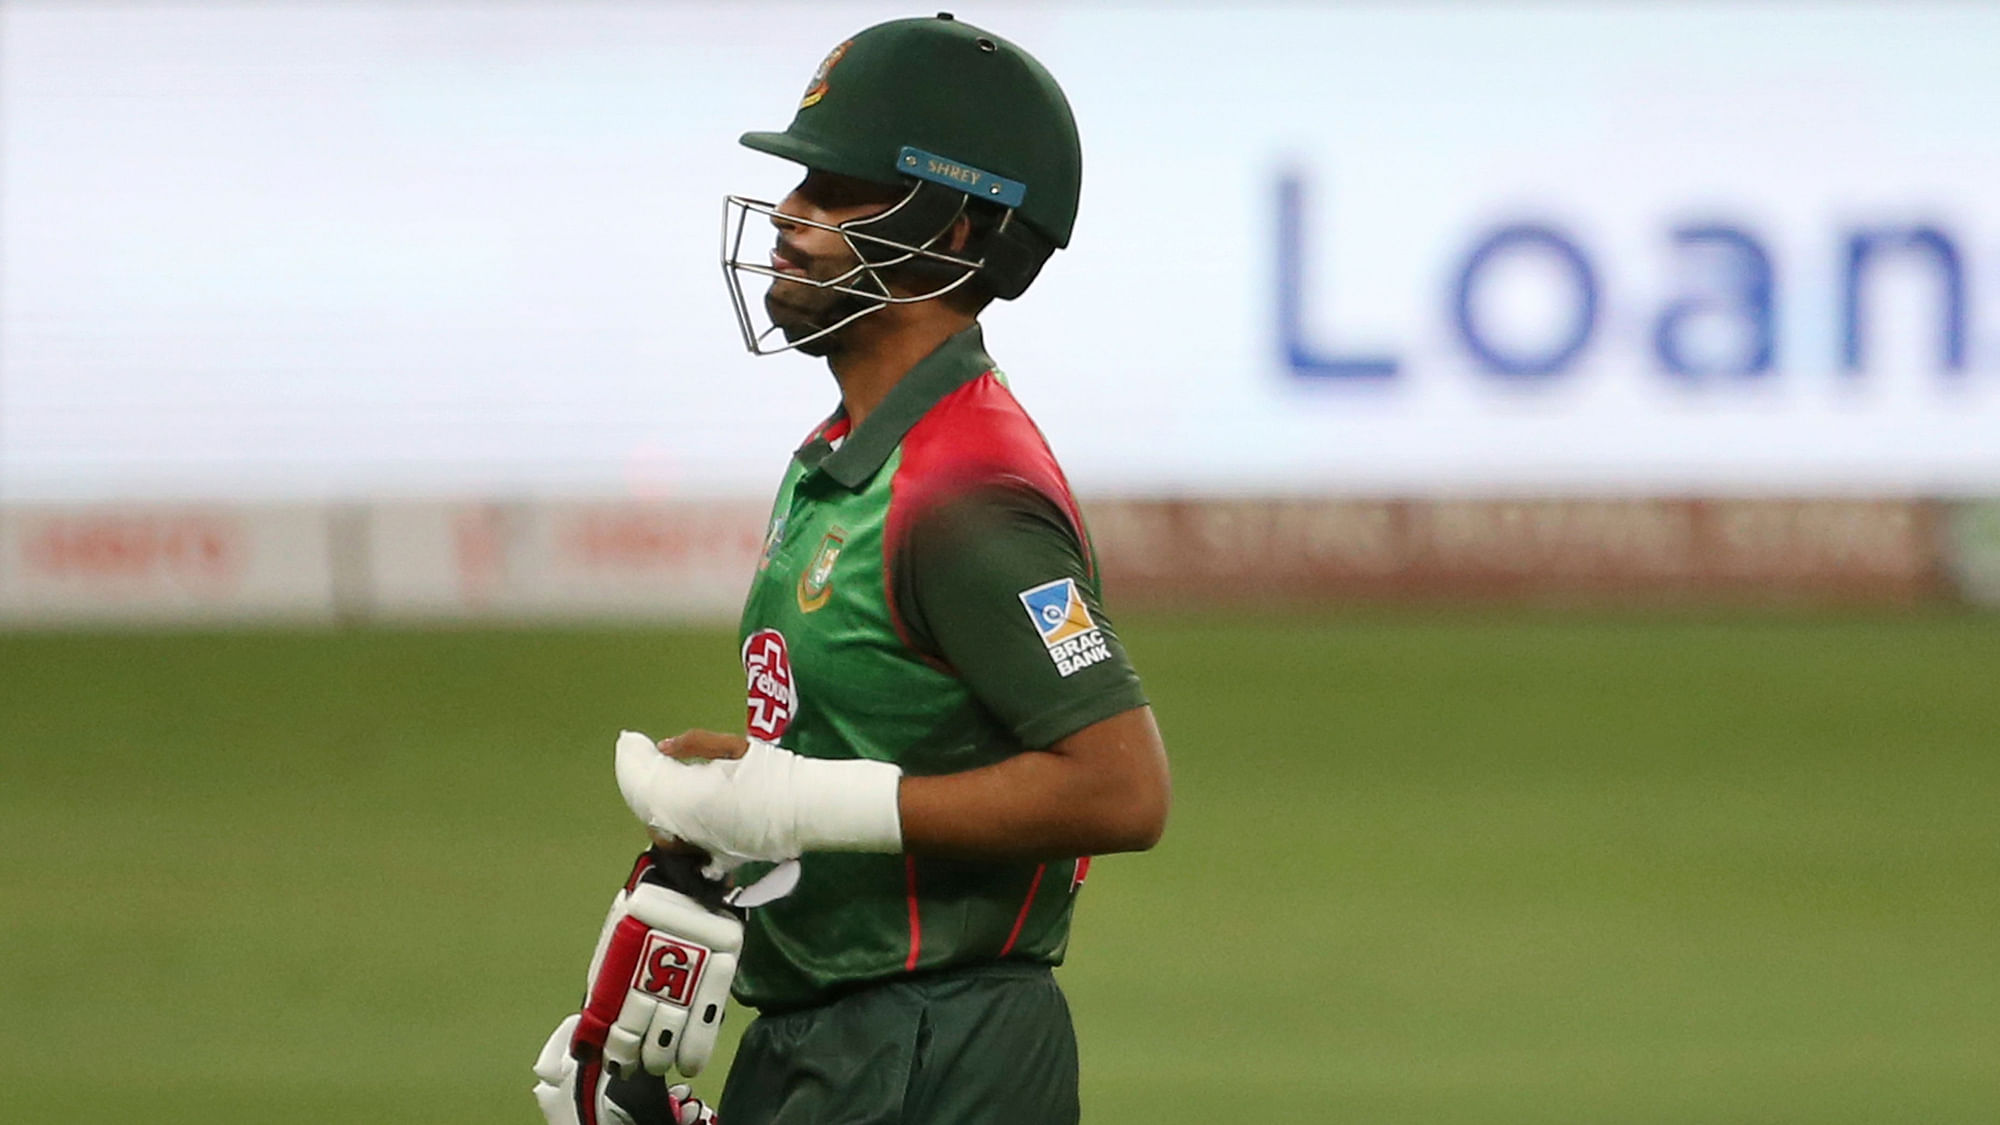 Tamim Iqbal batted, got inured, visited a hospital, returned with a wrist fracture and batted again.